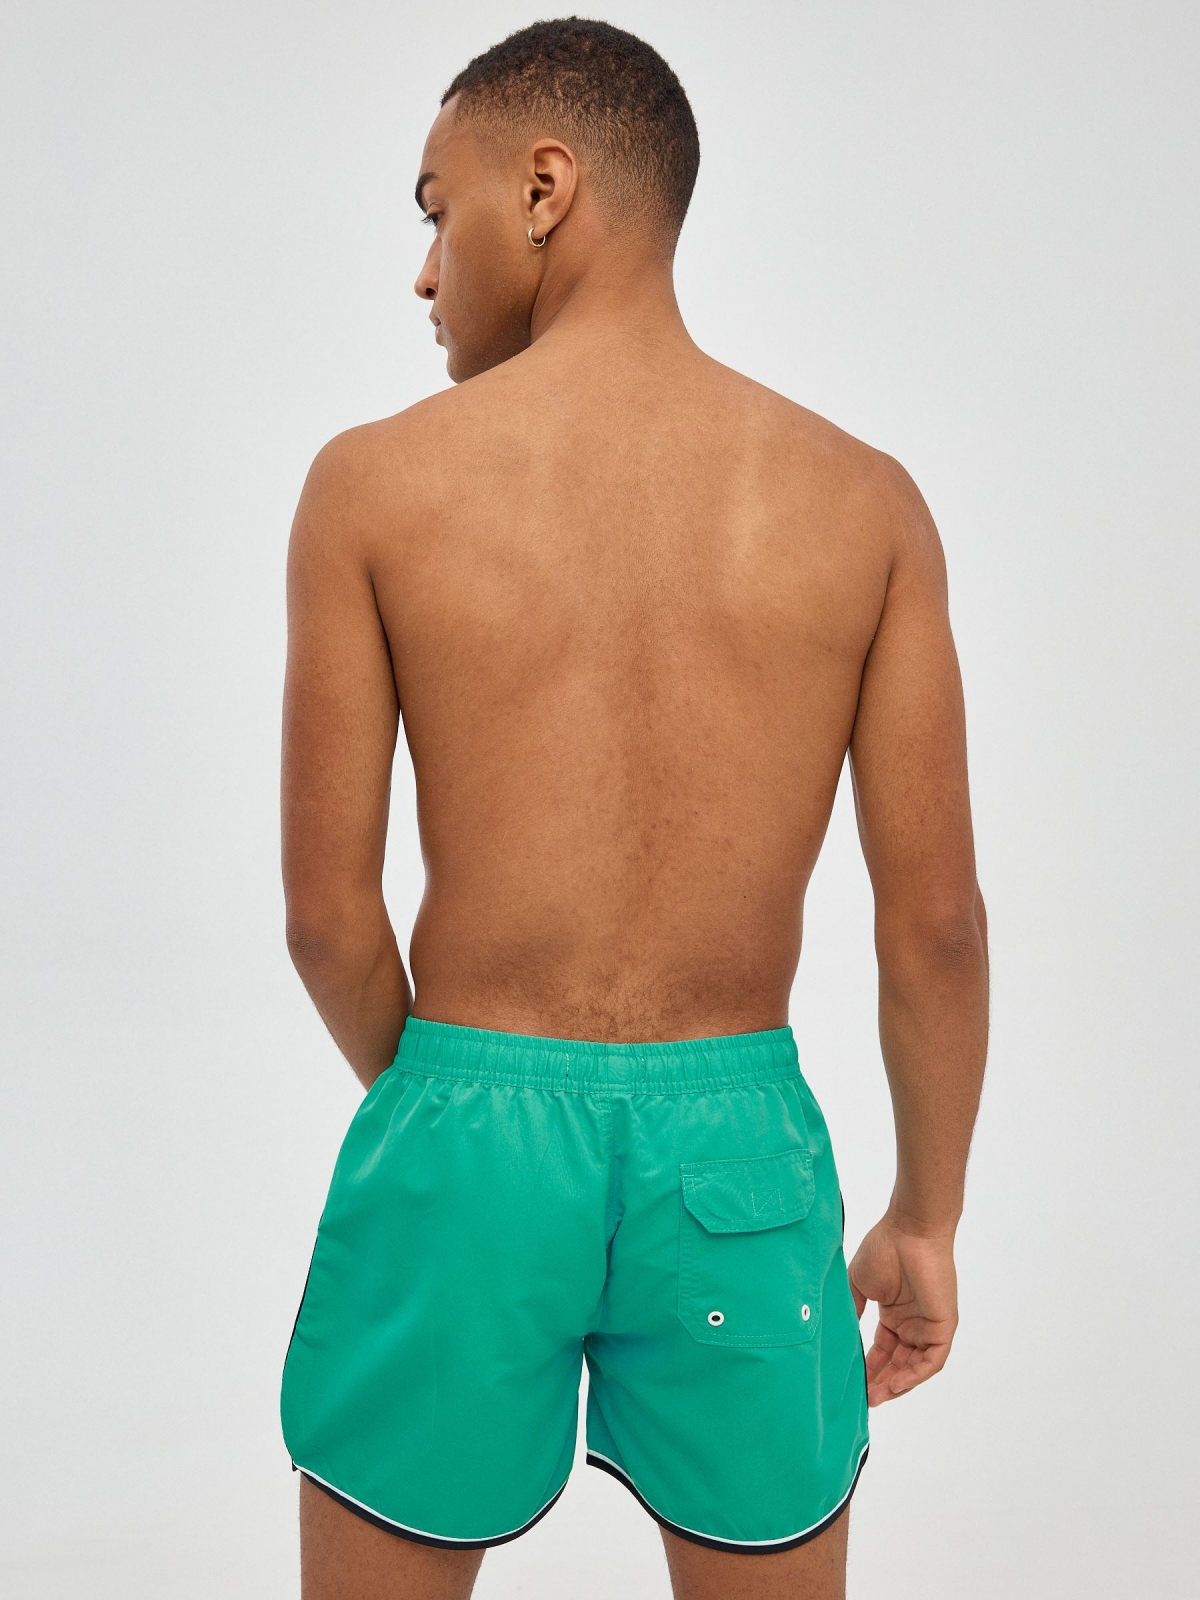 Contrast trim swimsuit green middle back view